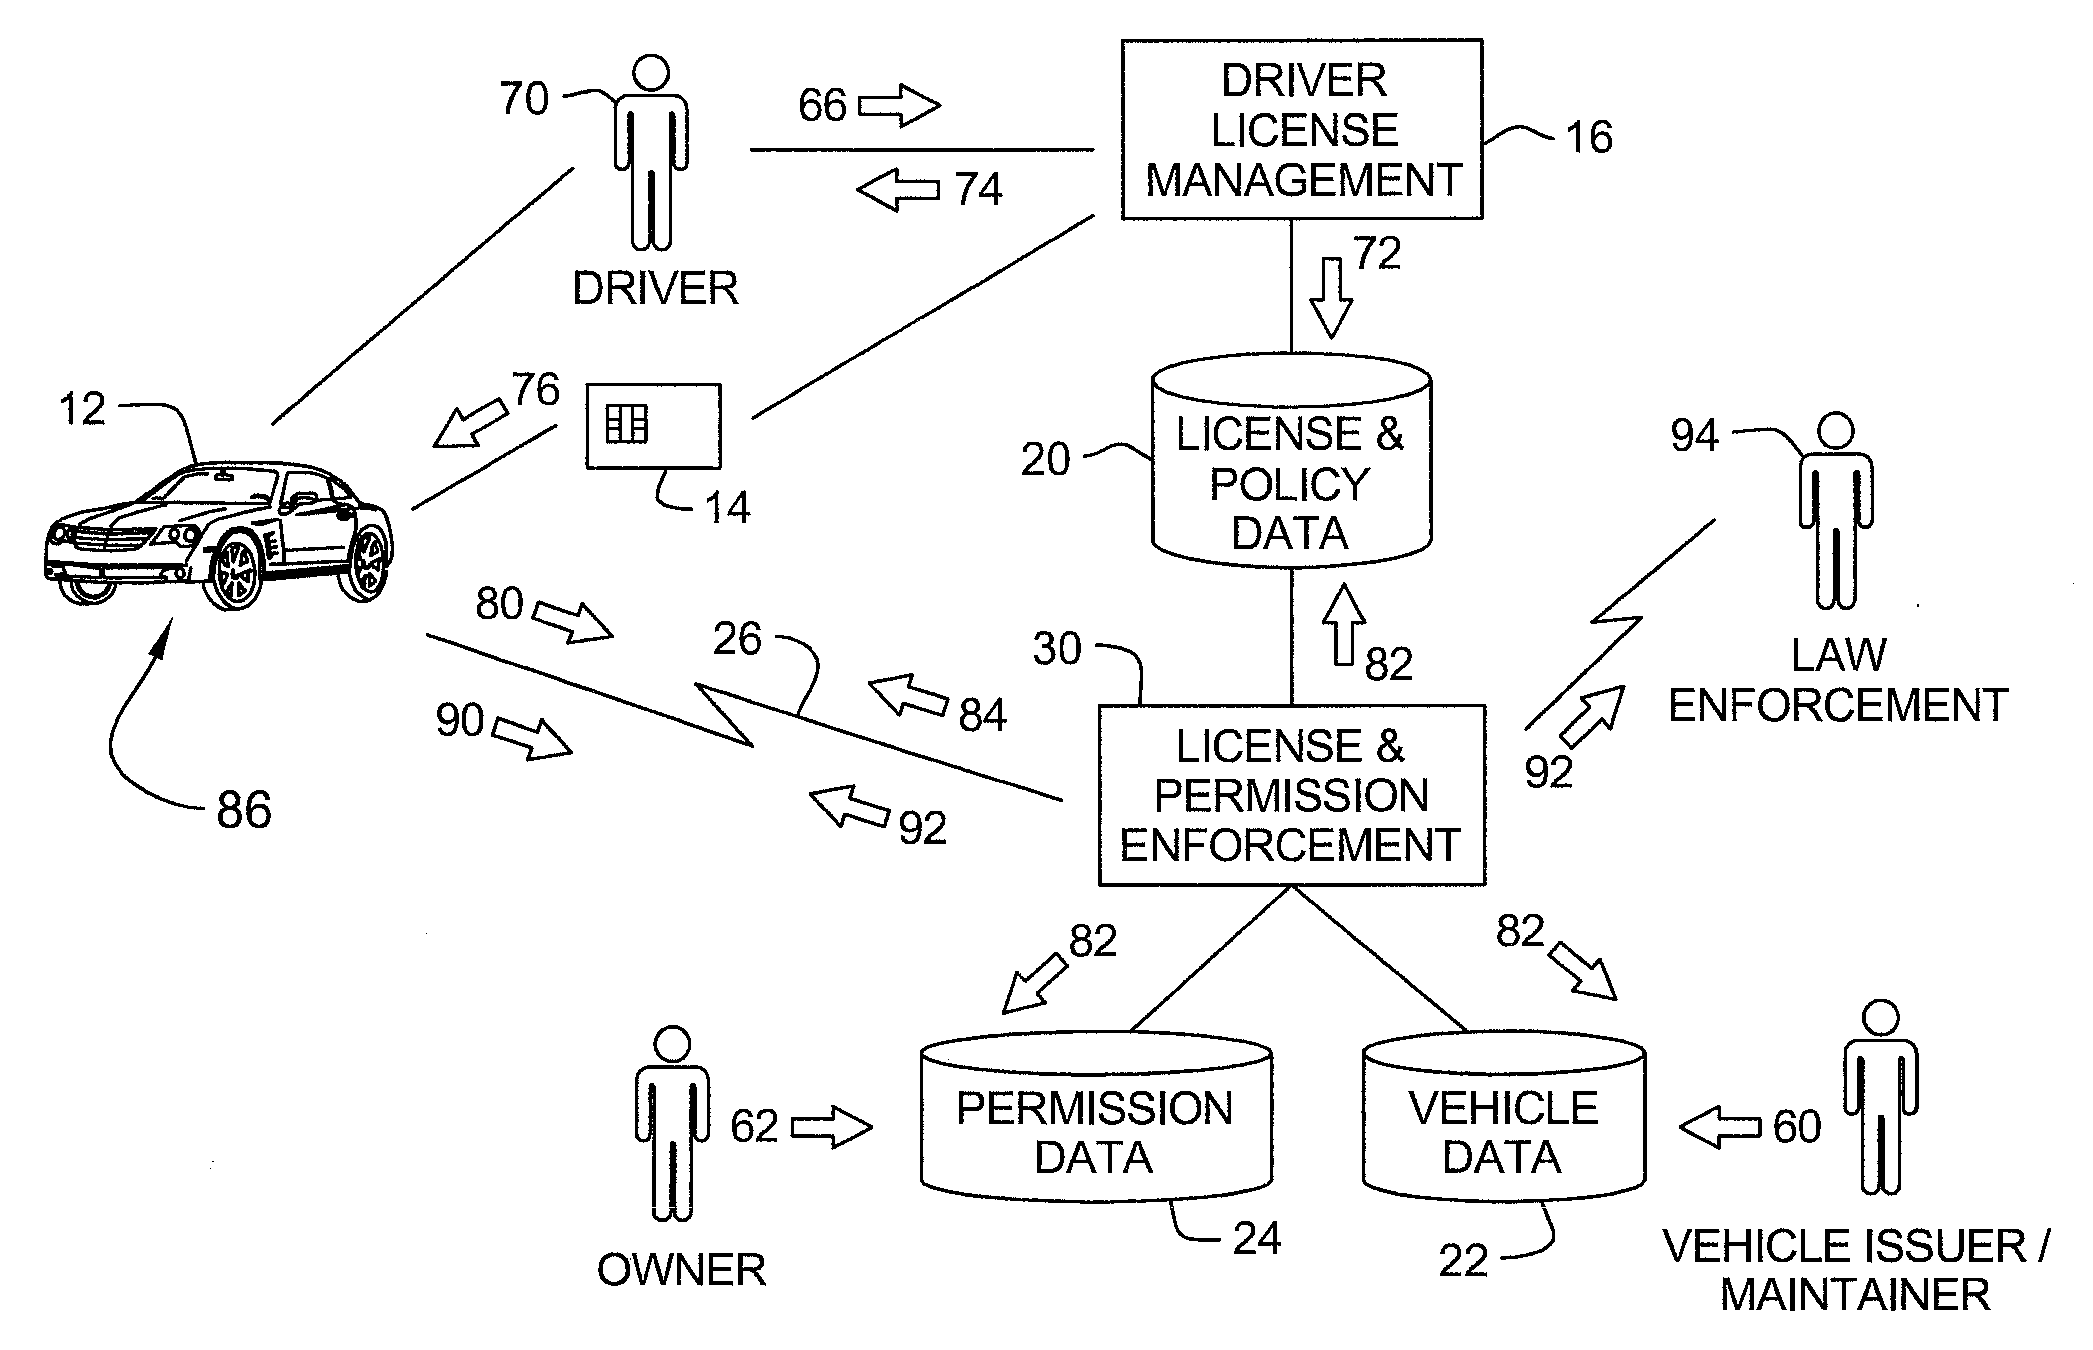 Driver and registration identification for vehicle enablement